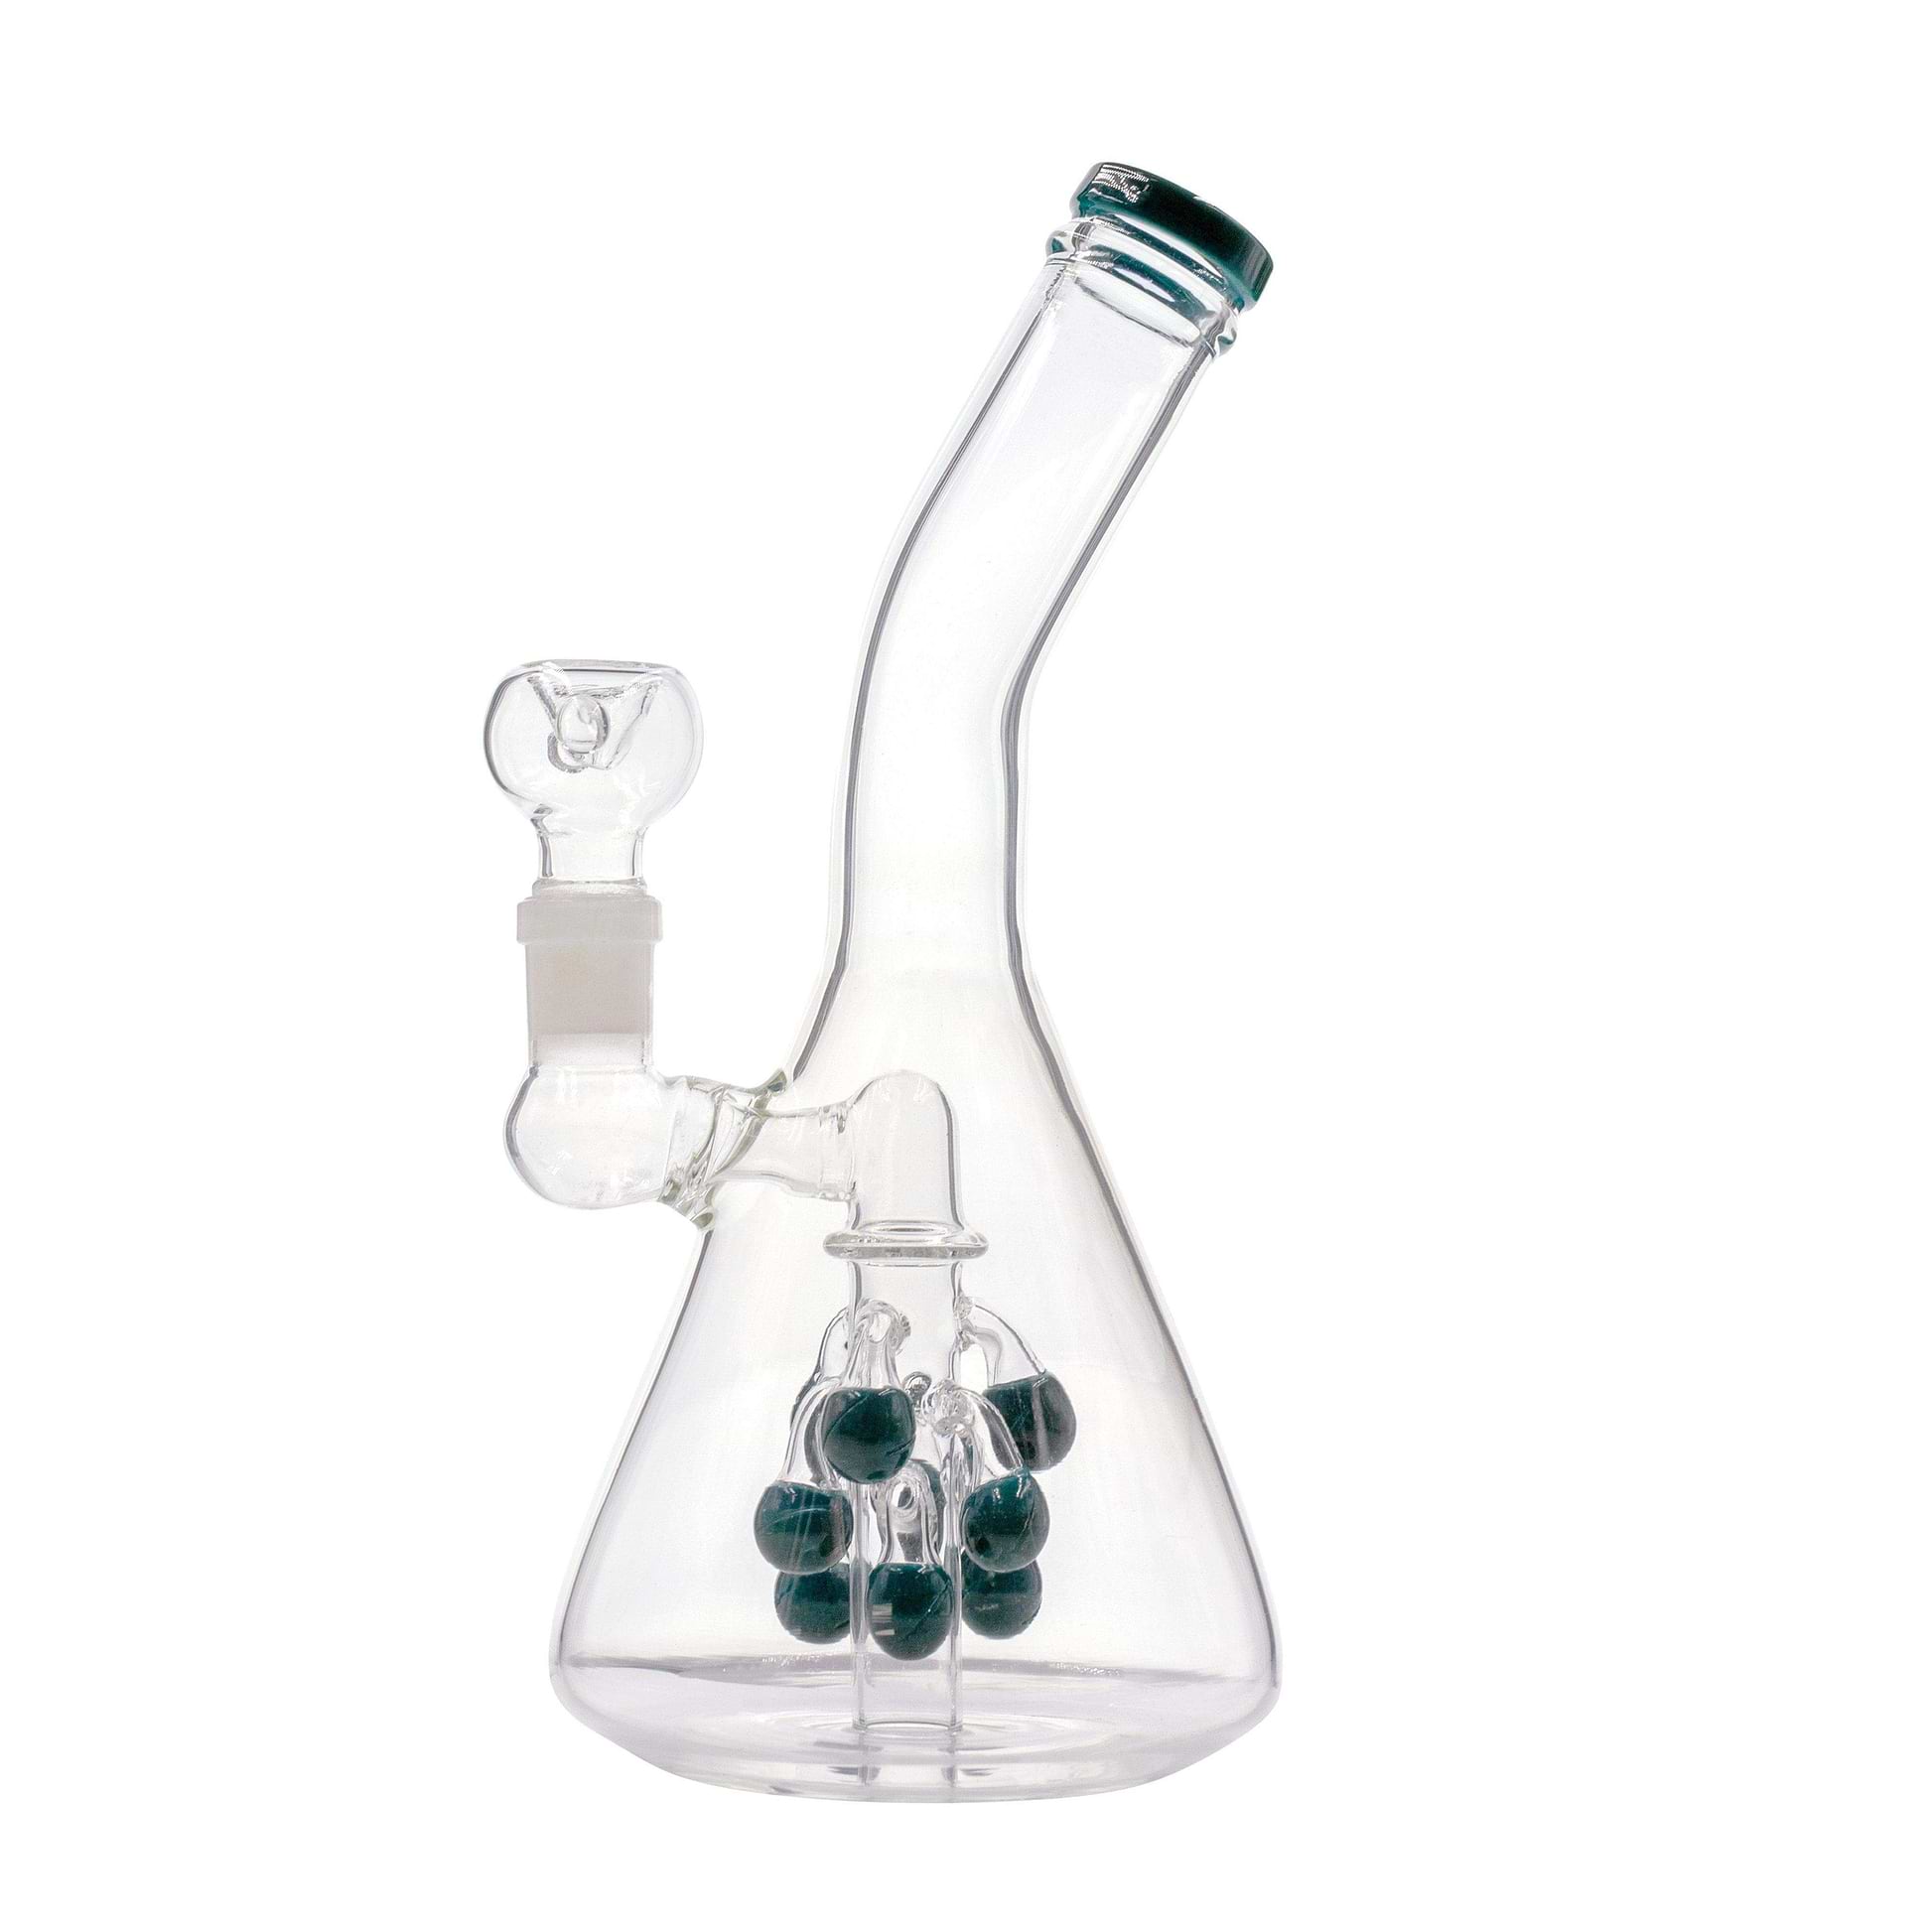 10-inch glass bong smoking device bent neck with 8 bulbs seeded percolator with splashguard bent neck